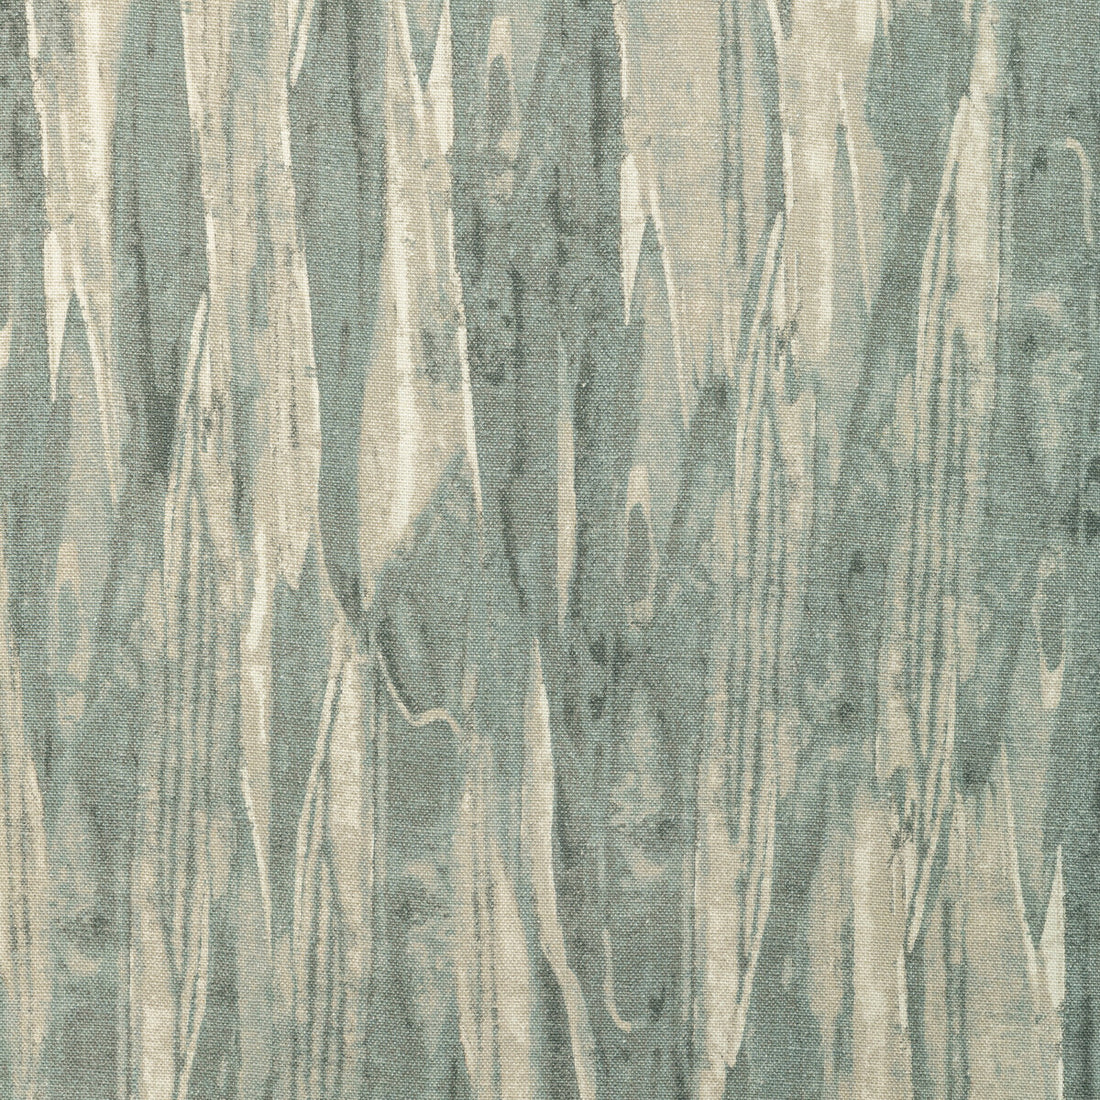 Drybrush fabric in granite color - pattern DRYBRUSH.1101.0 - by Kravet Couture in the Barbara Barry Ojai collection